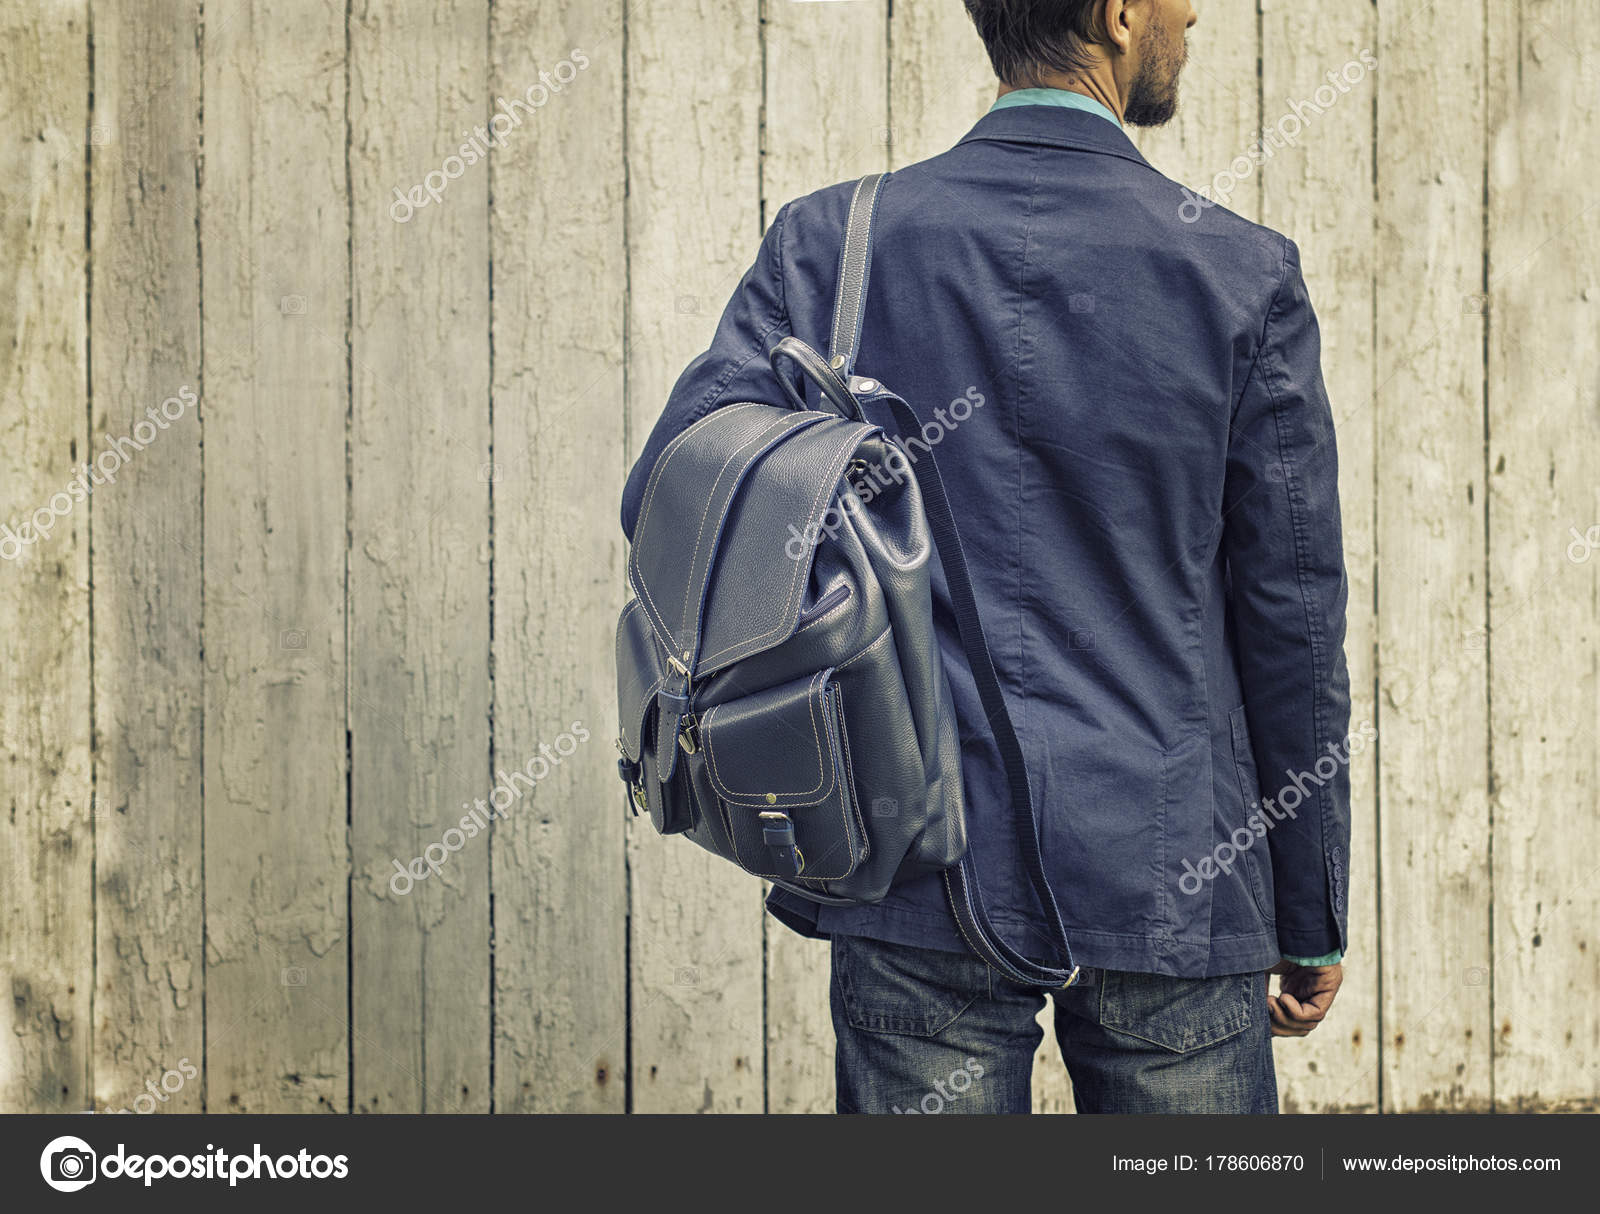 Leather Backpack With Suit | estudioespositoymiguel.com.ar